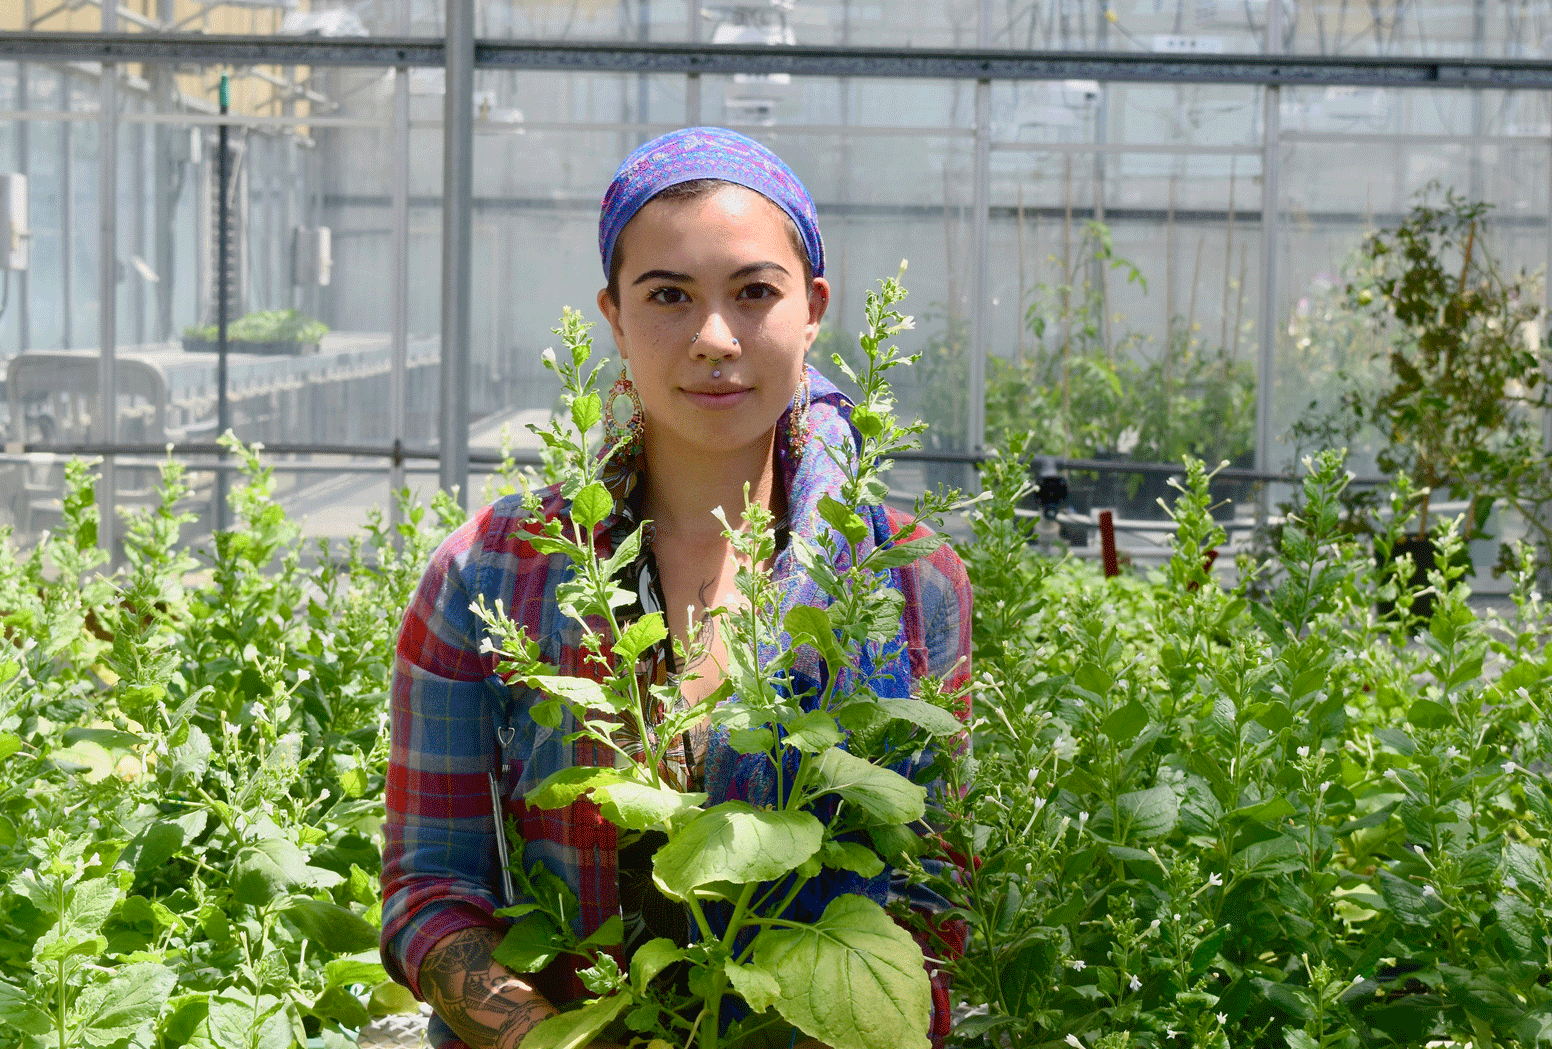 A young person standing in a greenhouse with research plants